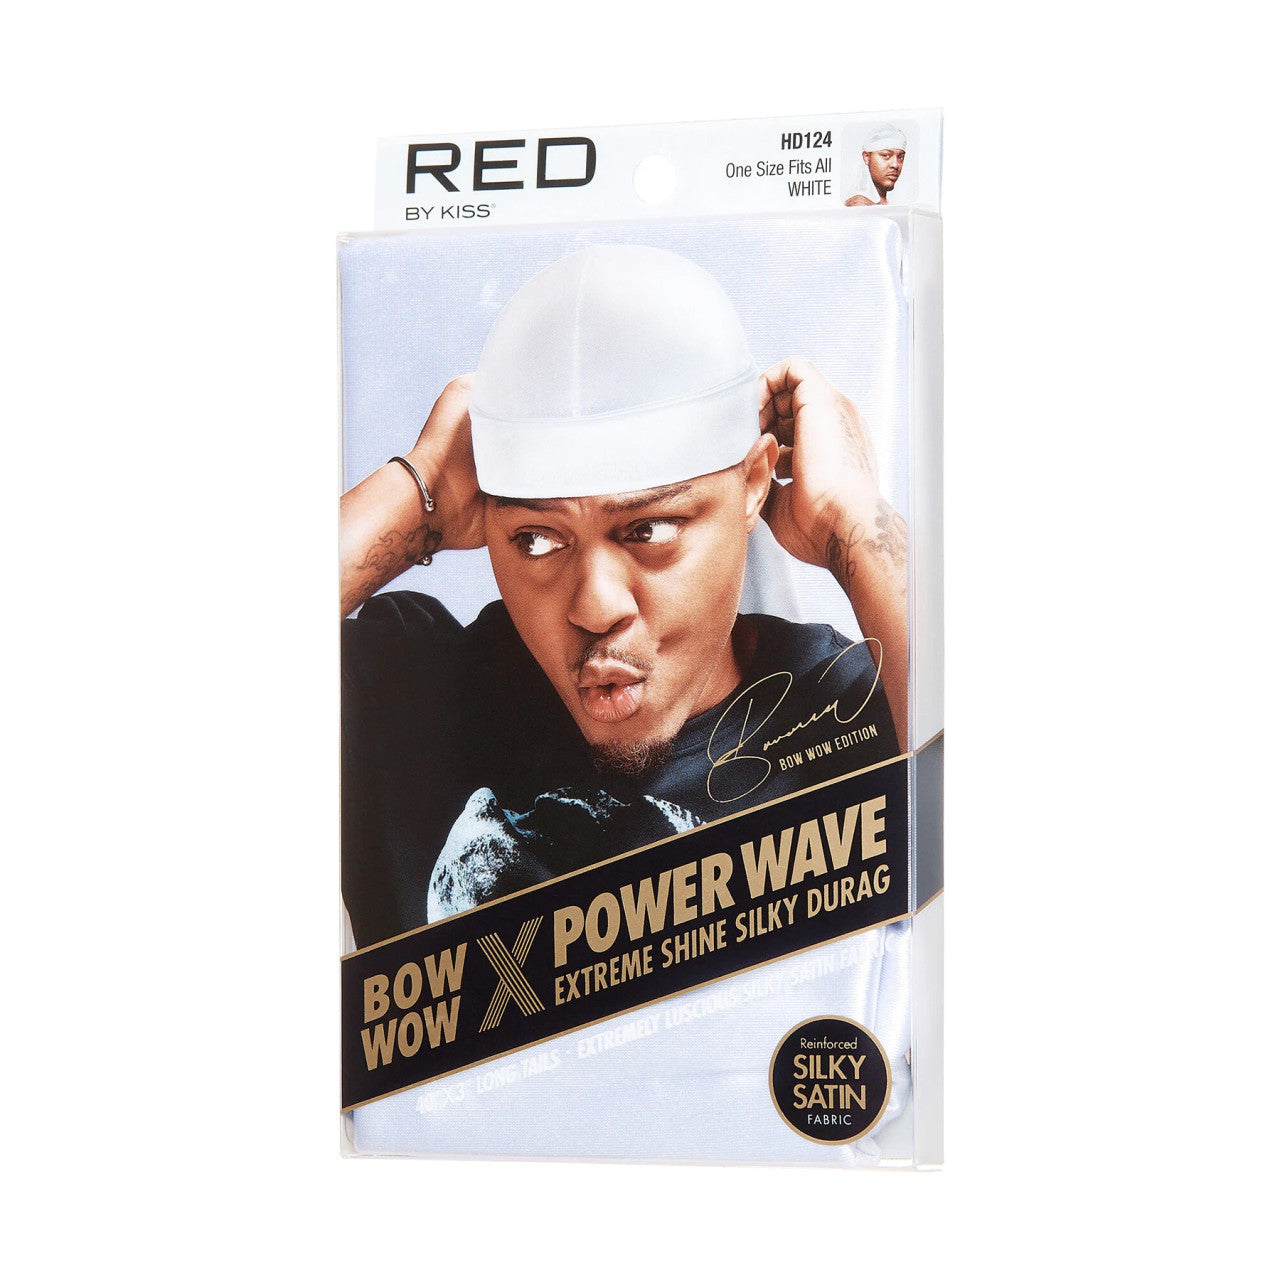 Red by Kiss Bow Wow X Power Wave Extreme Shine Silky Durag - White - #HD124